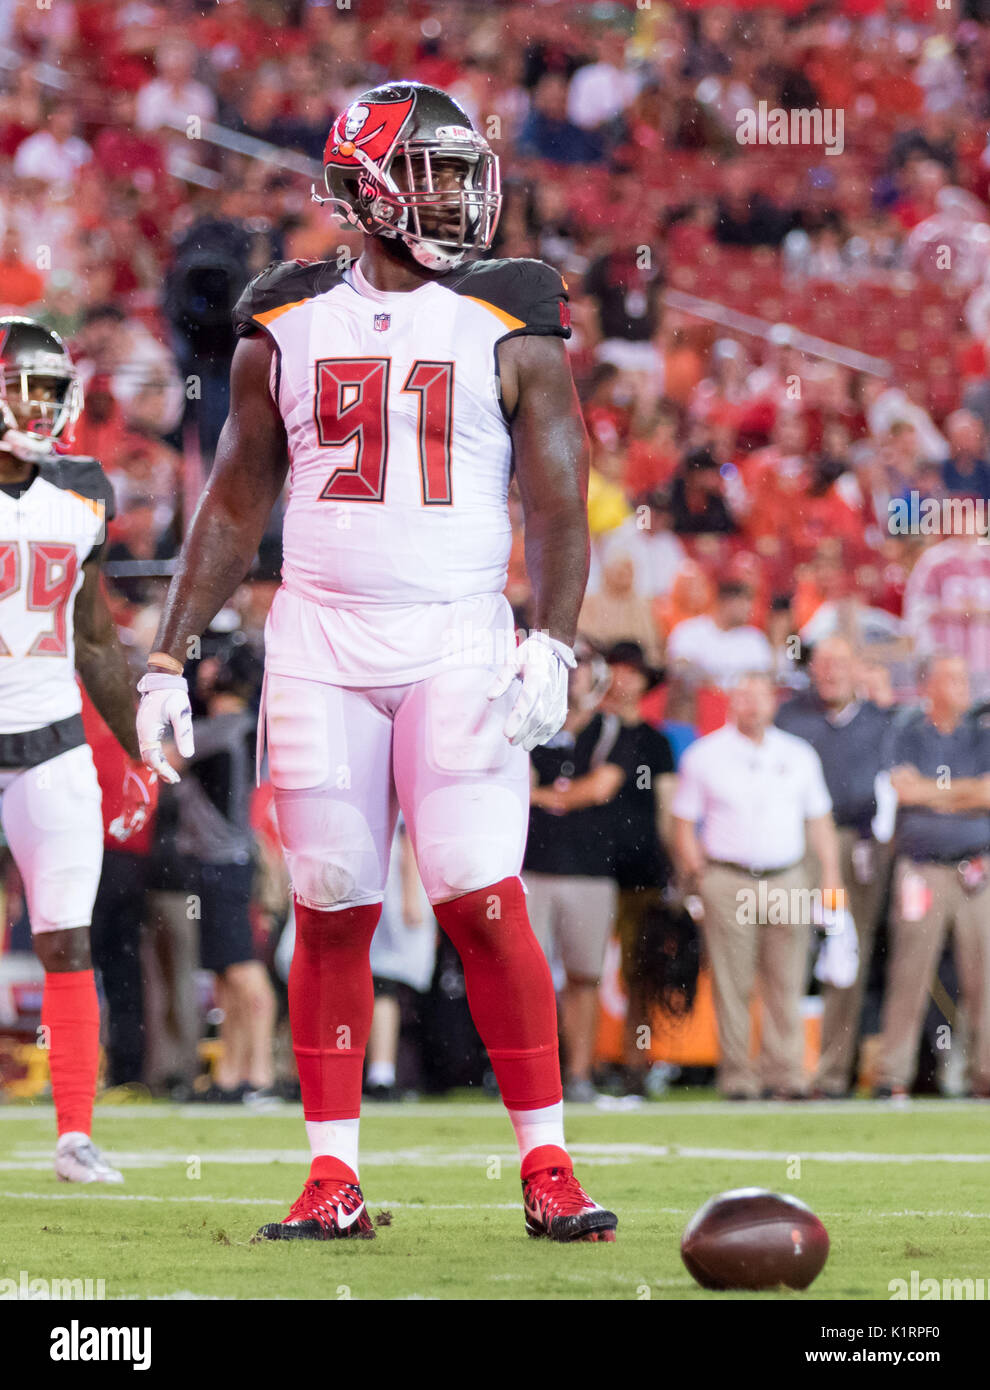 August 26, 2017 - Tampa Bay Buccaneers defensive end Robert Ayers (91) in the game between the Cleveland Browns and the Tampa Bay Buccaneers at Raymond James Stadium in Tampa, Florida. Del Mecum/CSM Stock Photo